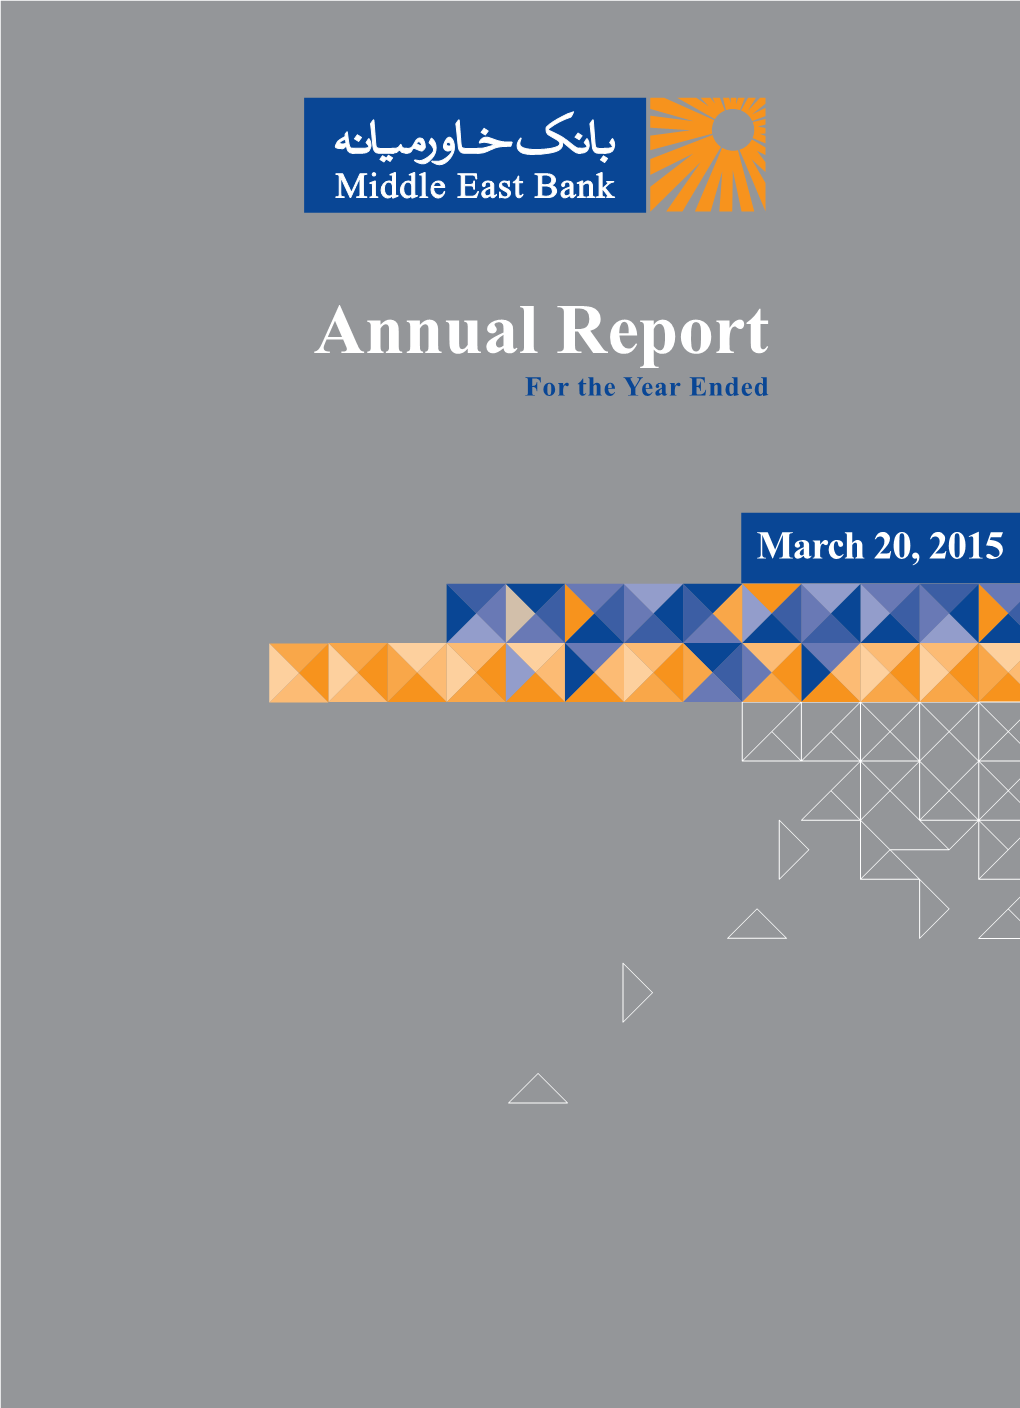 Annual Report for the Year Ended